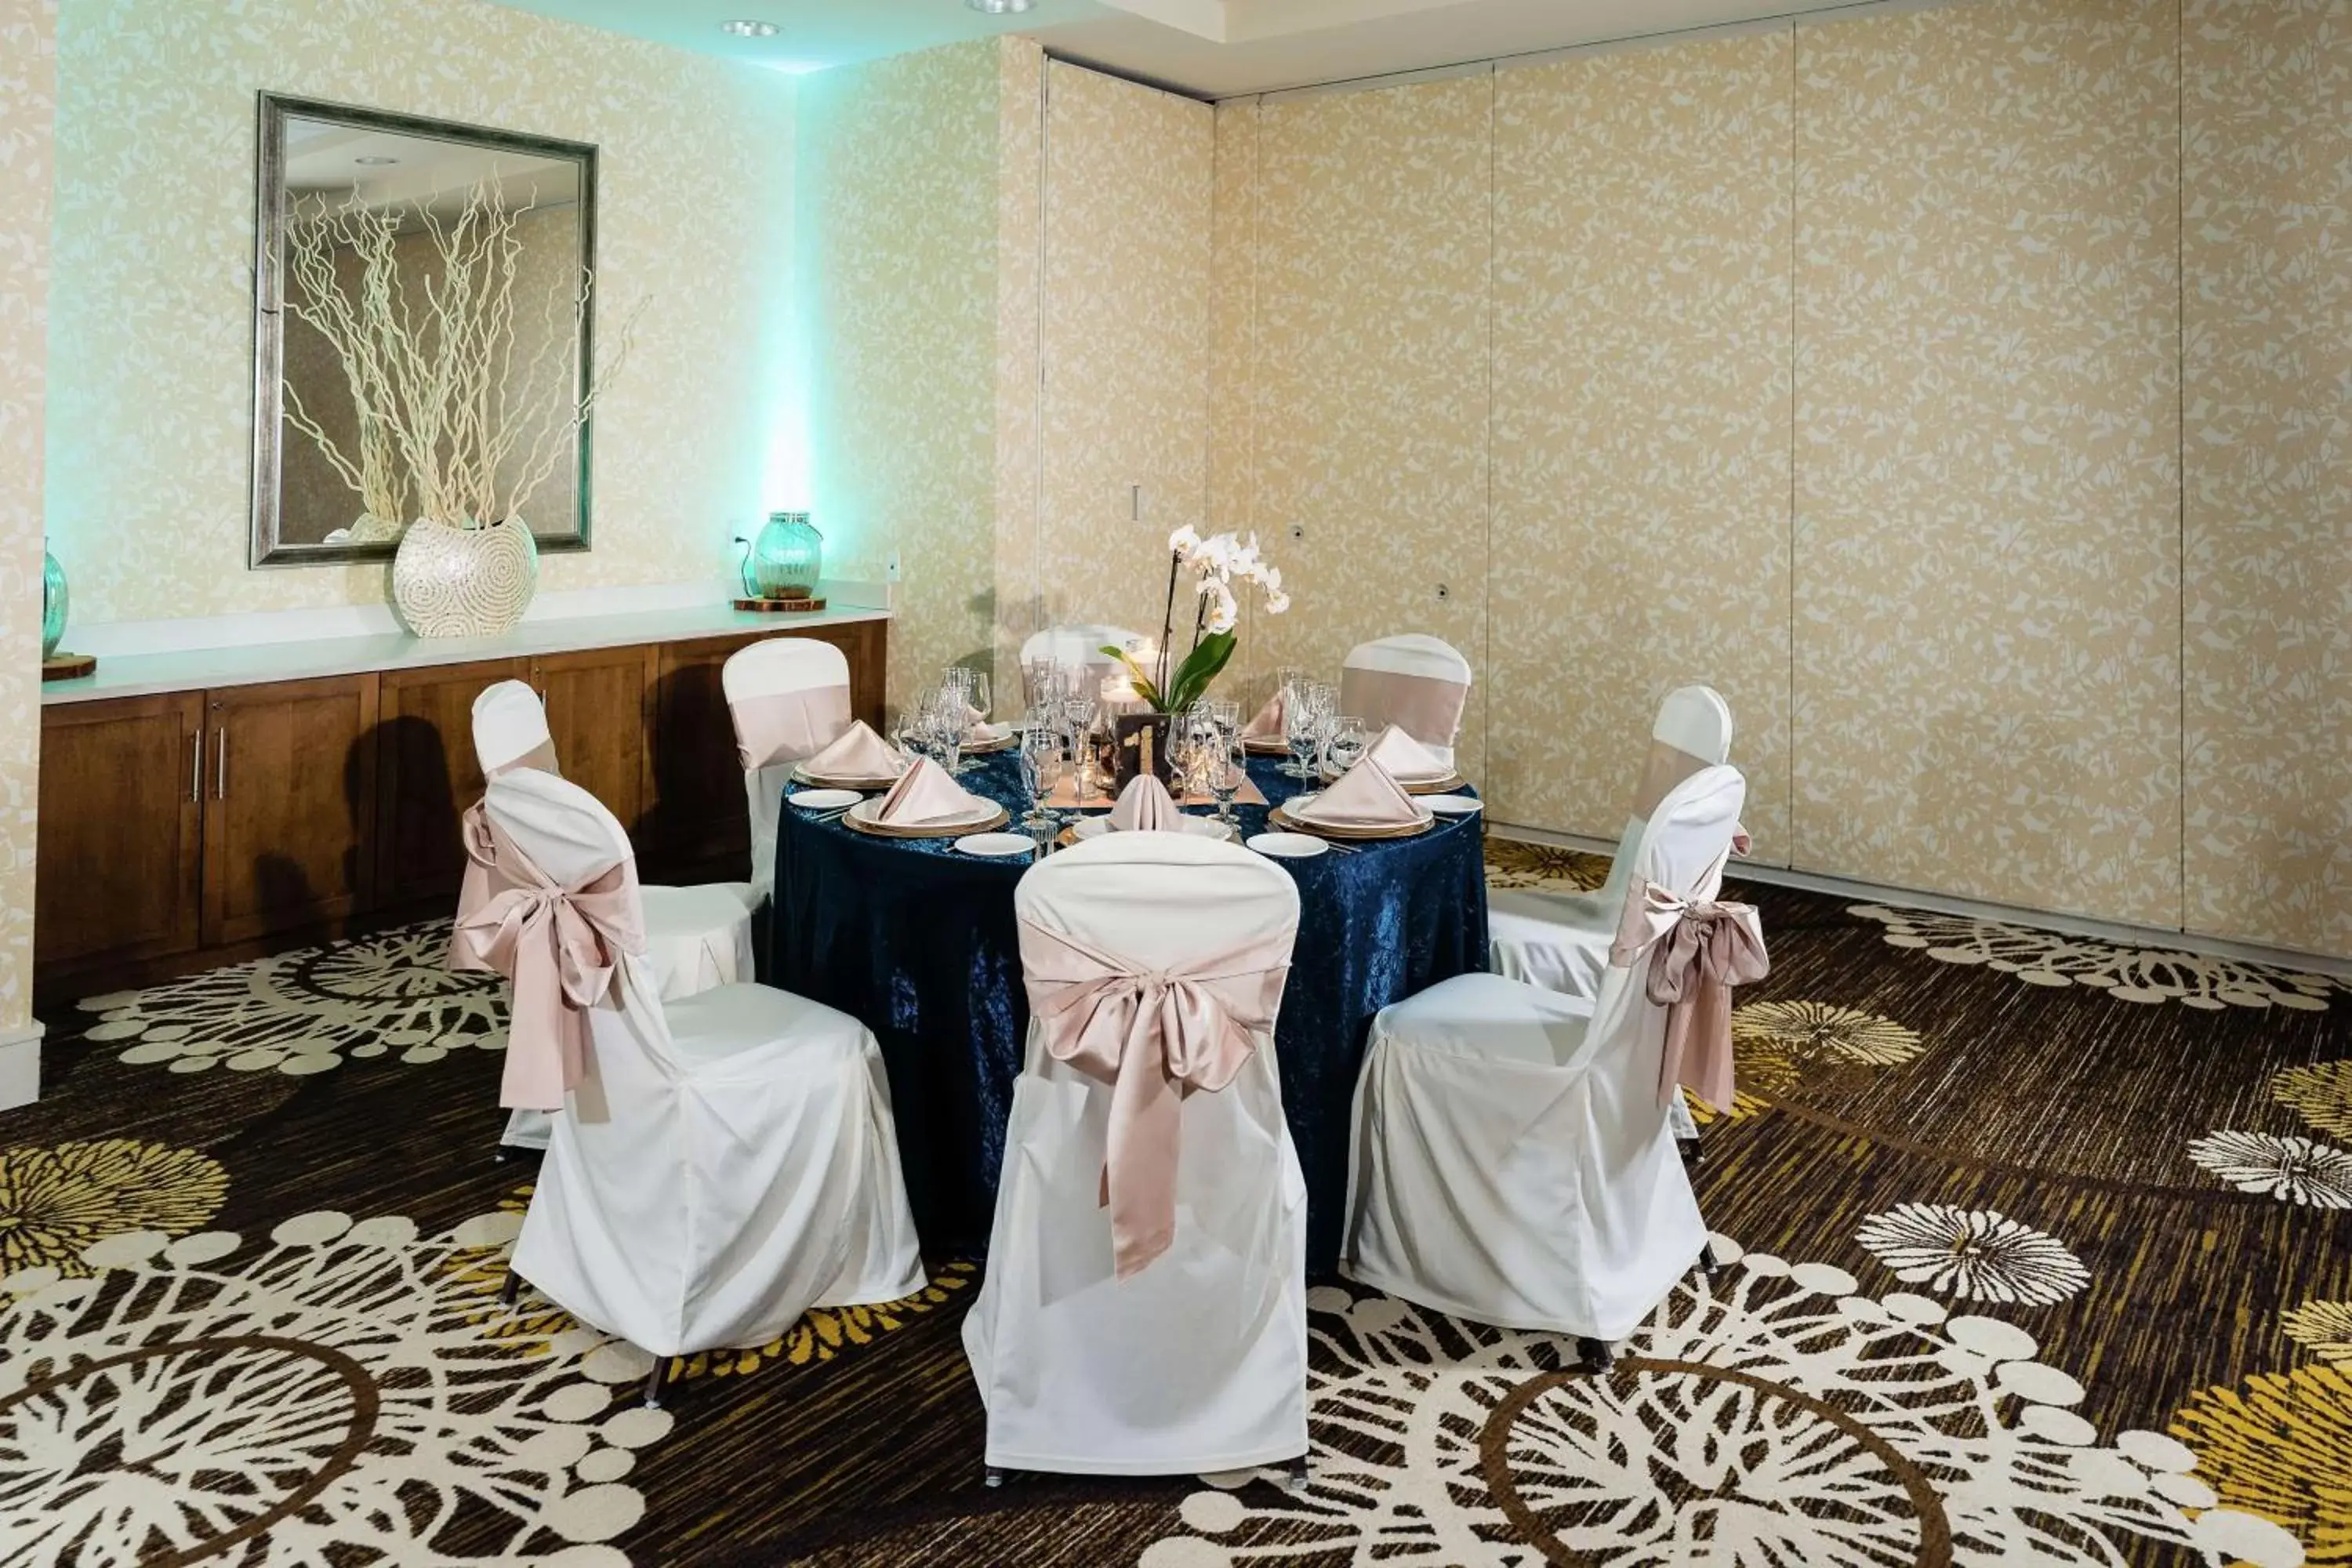 Meeting/conference room, Banquet Facilities in Hilton Garden Inn Exton-West Chester